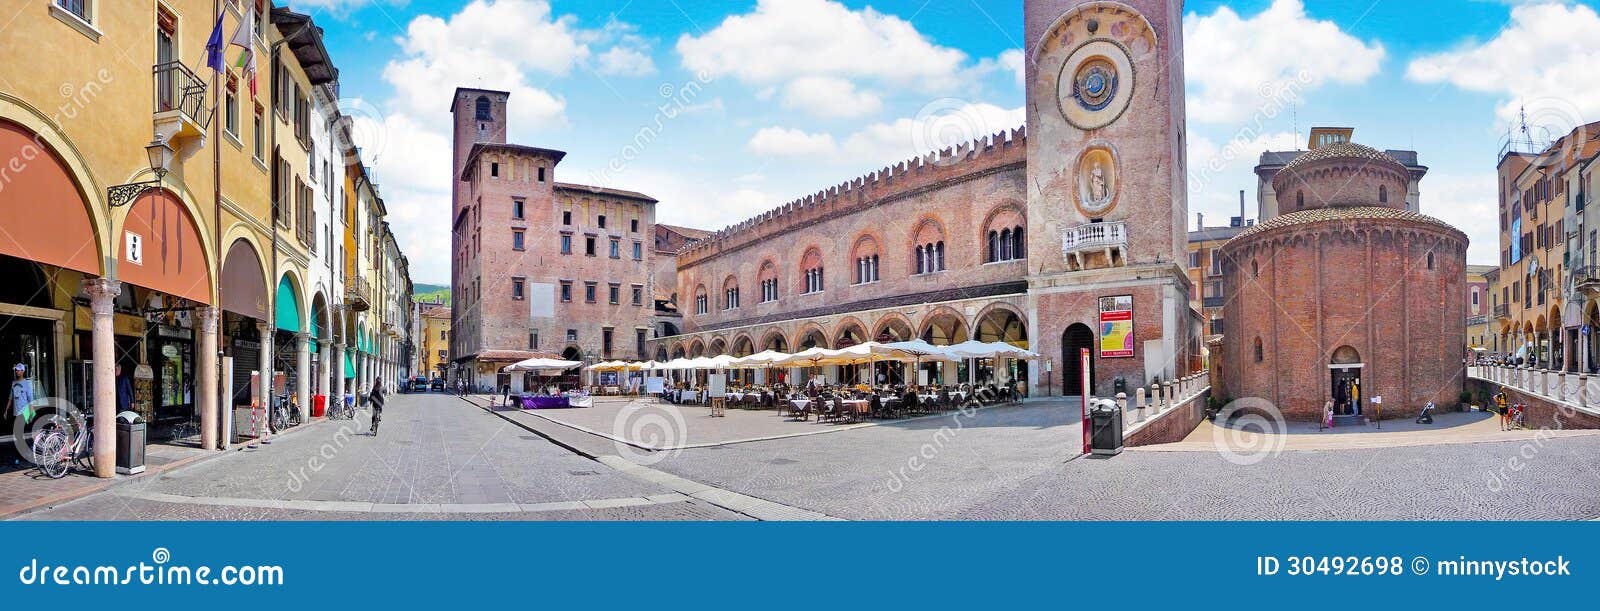 city center of the historic town of mantua in lombardy, italy